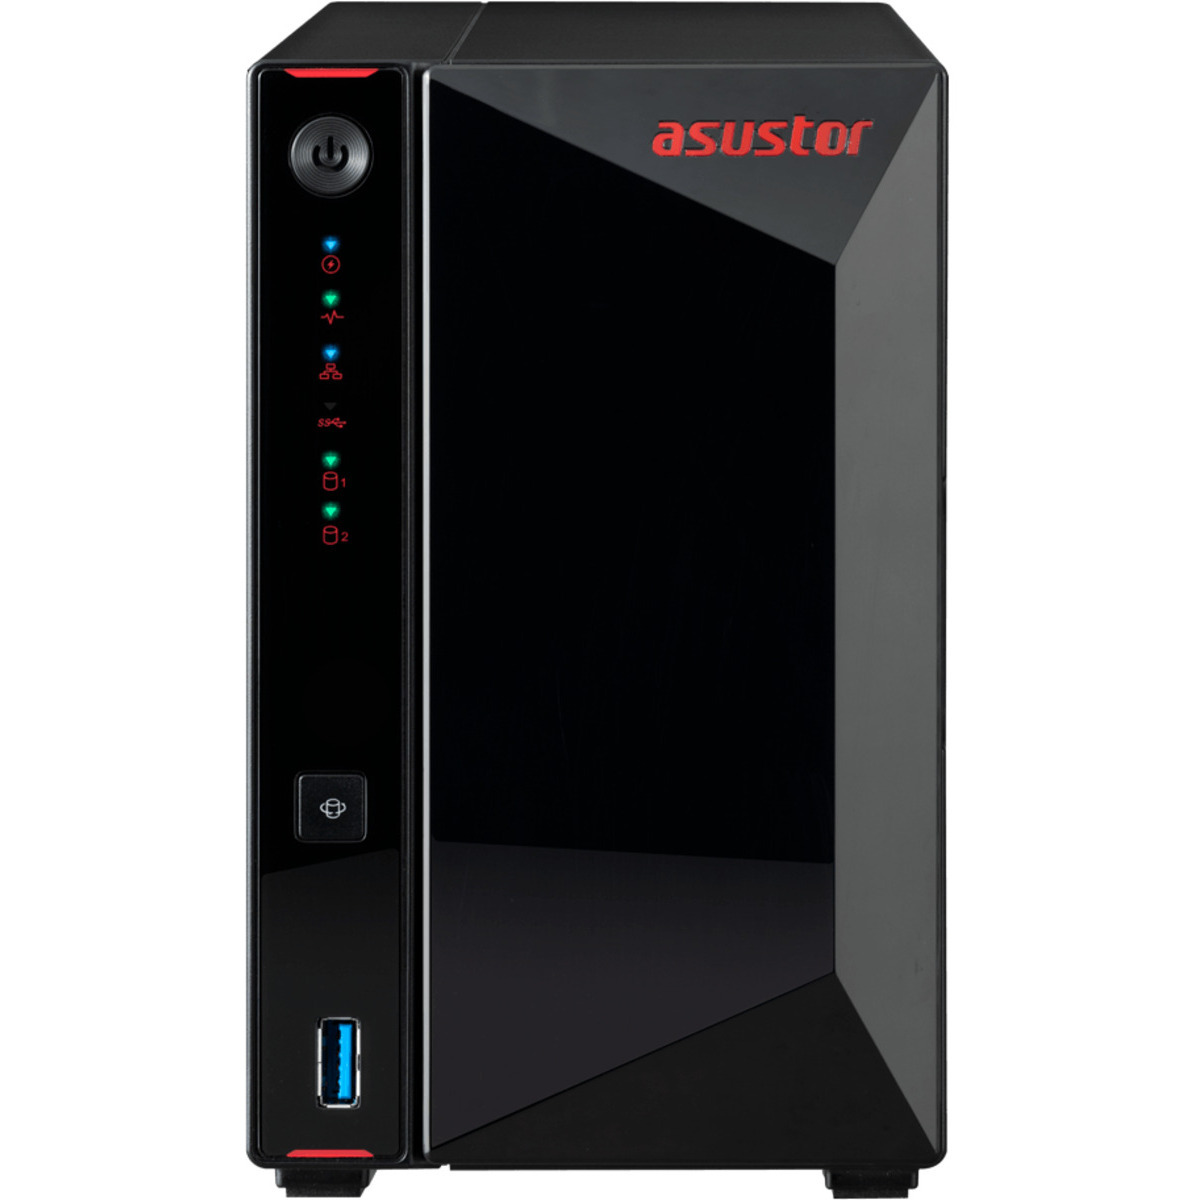 buy $1405 ASUSTOR AS5202T Nimbustor 16tb Desktop NAS - Network Attached Storage Device 2x8000gb Samsung 870 QVO MZ-77Q8T0 2.5 560/530MB/s SATA 6Gb/s SSD CONSUMER Class Drives Installed - Burn-In Tested - FREE RAM UPGRADE - nas headquarters buy network attached storage server device das new raid-5 free shipping usa AS5202T Nimbustor